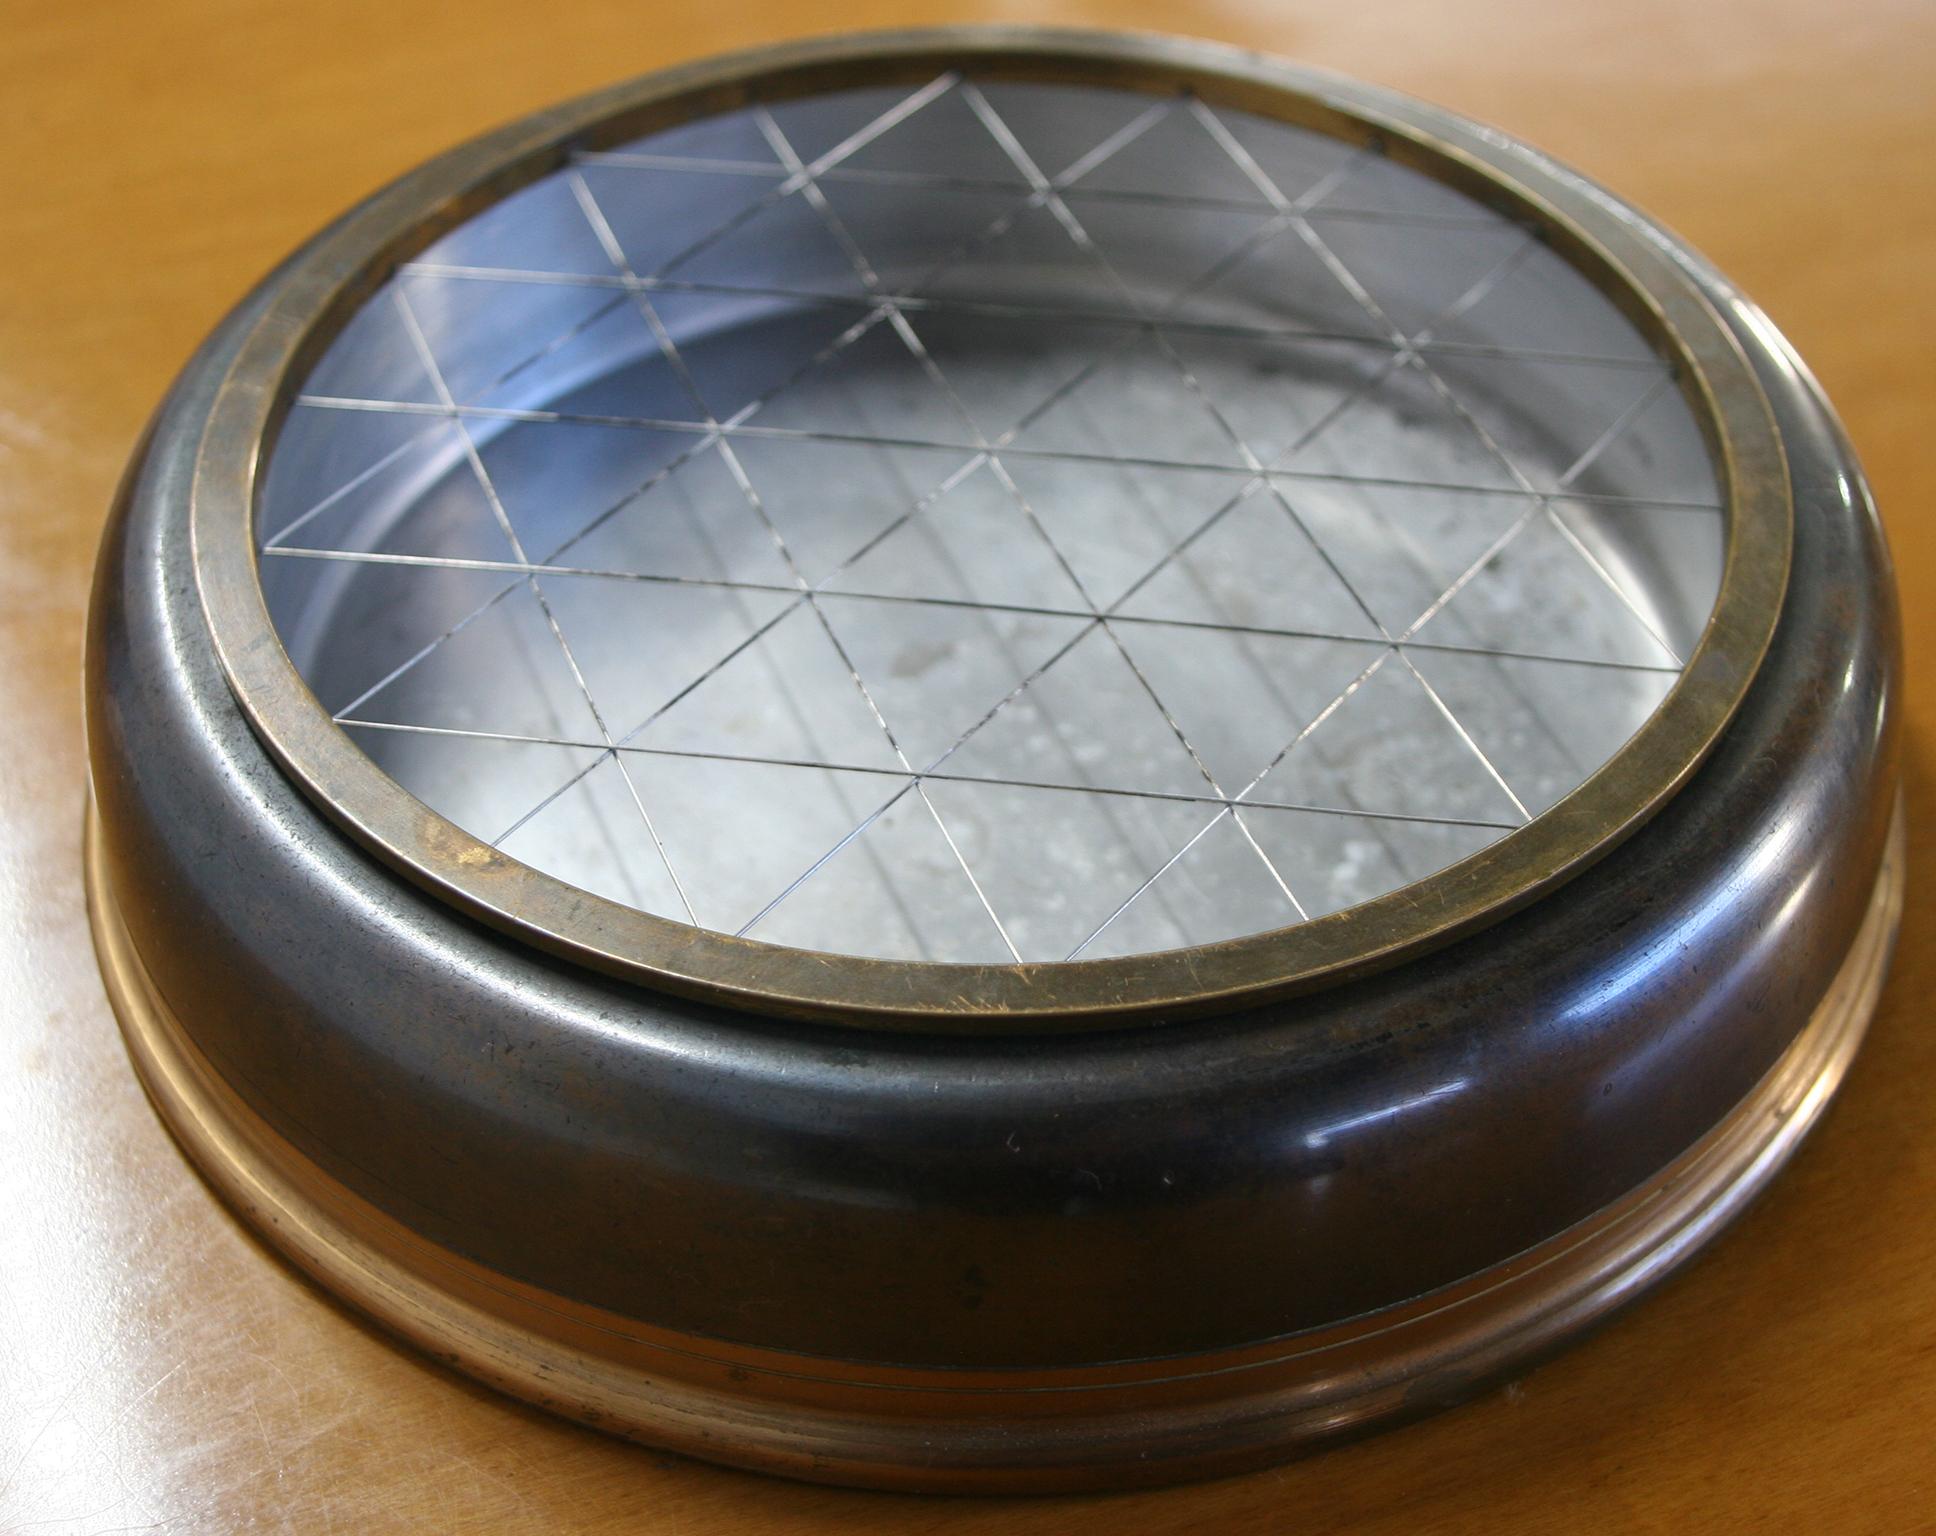 Beautiful Mid-Century Modern Geometric large brass wire ashtray style of Paul McCobb, circa 1950 solid brass ring with stainless steel wire in a geometric pattern to cut off the ash from your cigarette or cigar. Very elegant for any midcentury decor